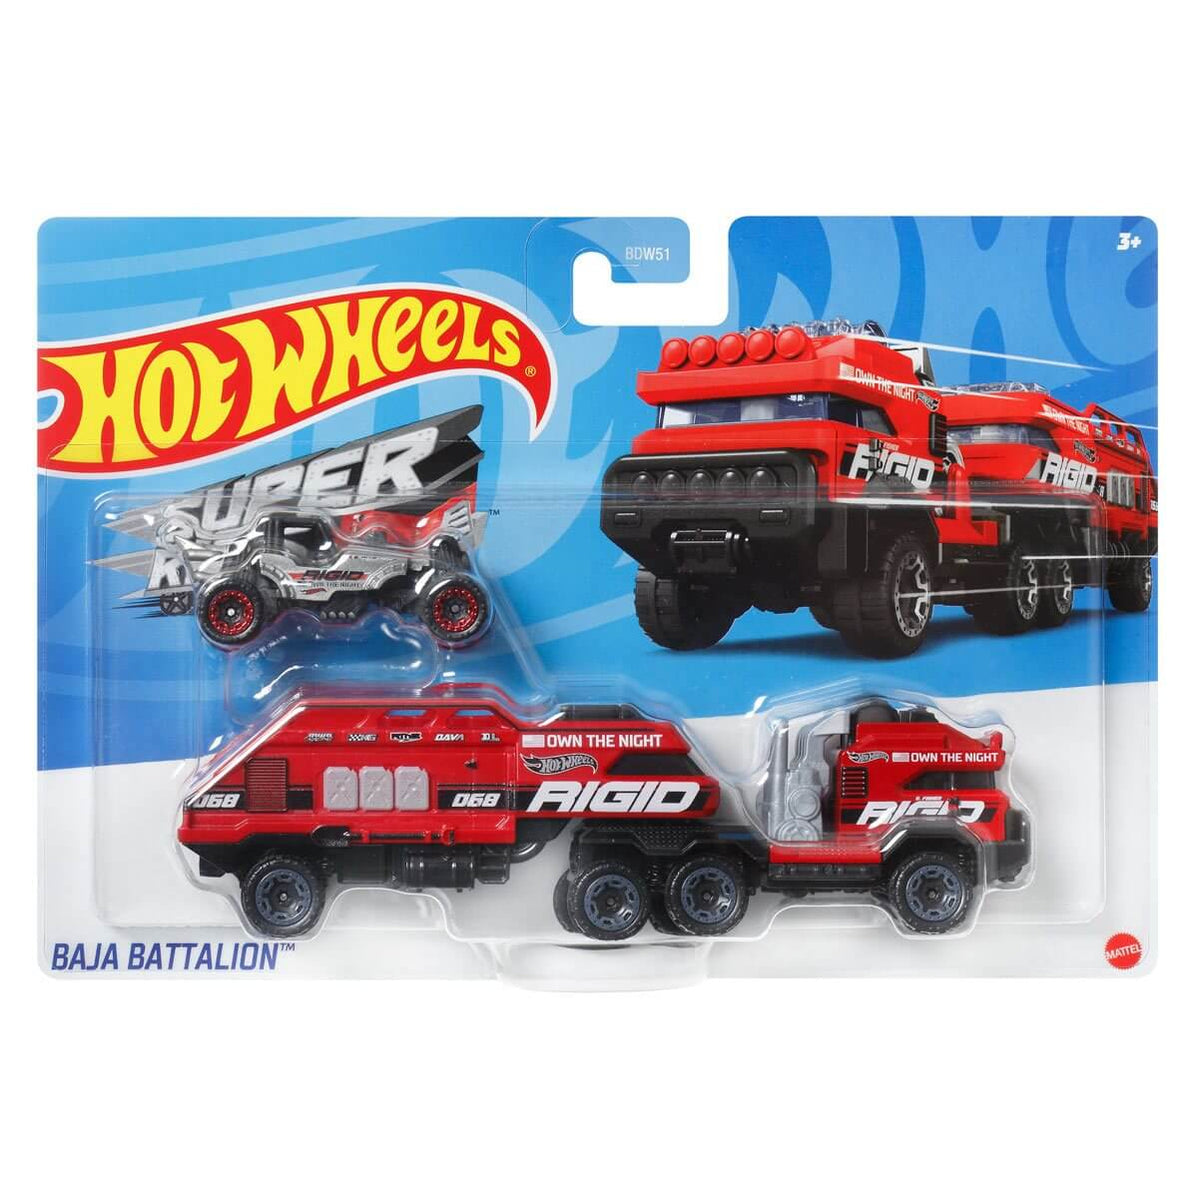 Hot Wheels Super Rigs Baja Battalion With 1 Hot Wheels 1:64 Scale Car for Ages 3 Years Old&Up (HMF94)